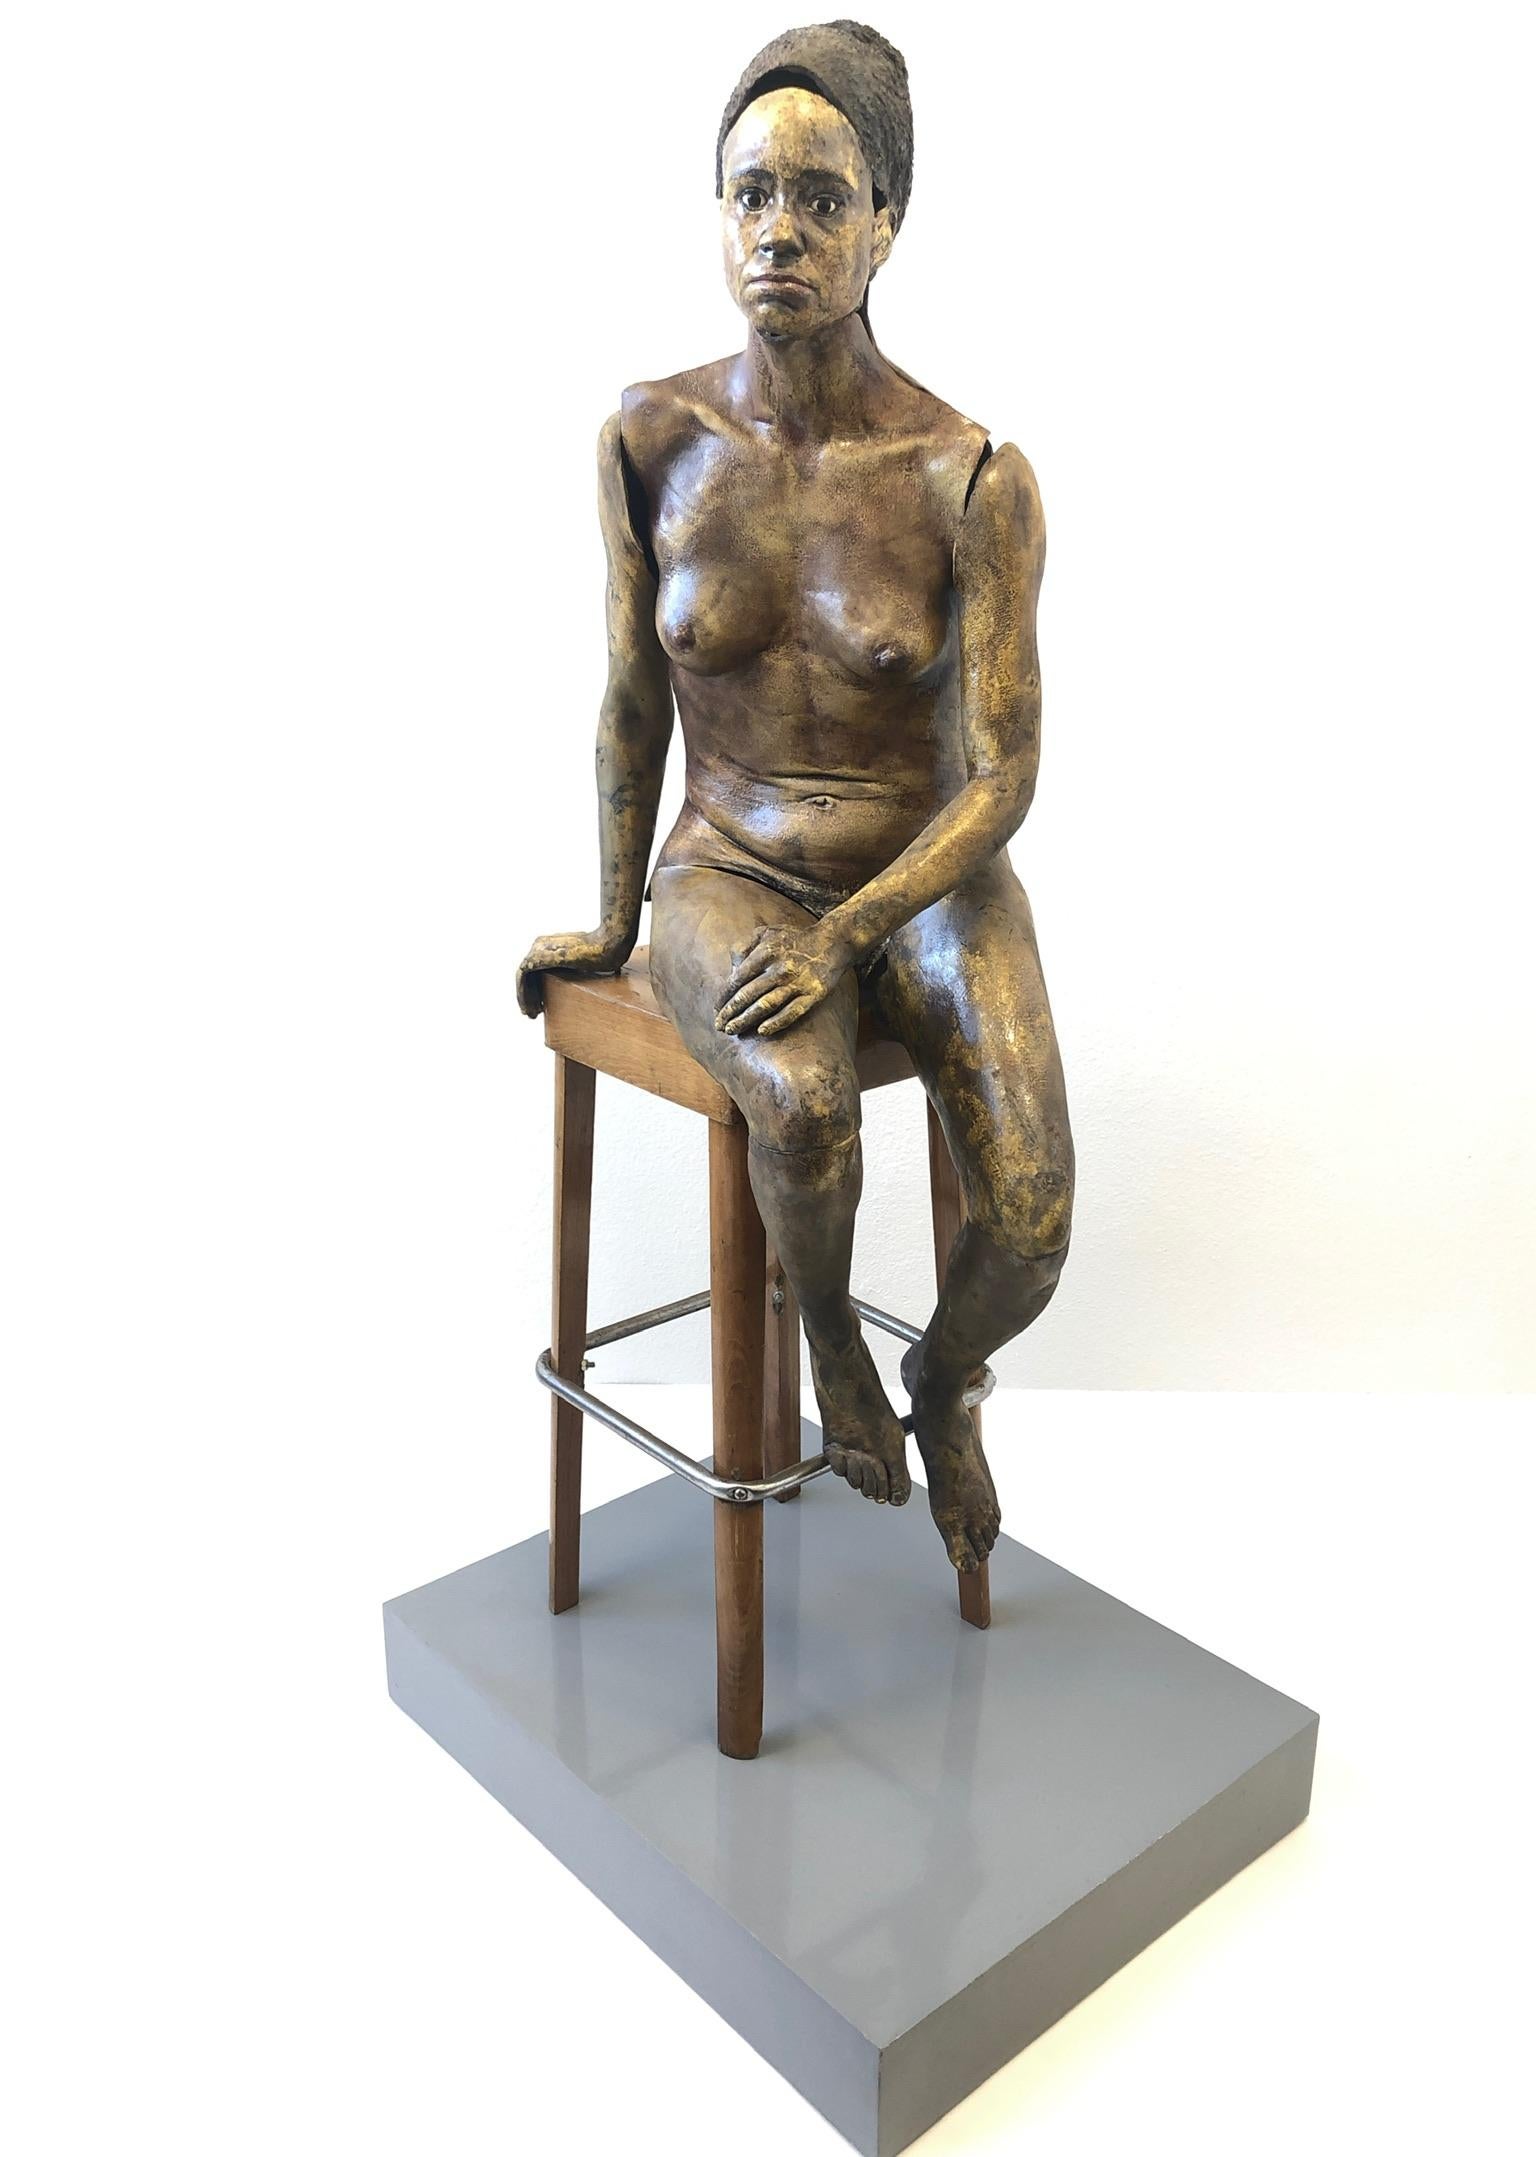 1980s life-size Raku-fired ceramic female nude sculpture by American sculptor Eva Stettner.
Constructed of ceramic that is low fired glazed, the stool is lacquered wood with a chrome footrest and the base is wood that’s lacquered lite